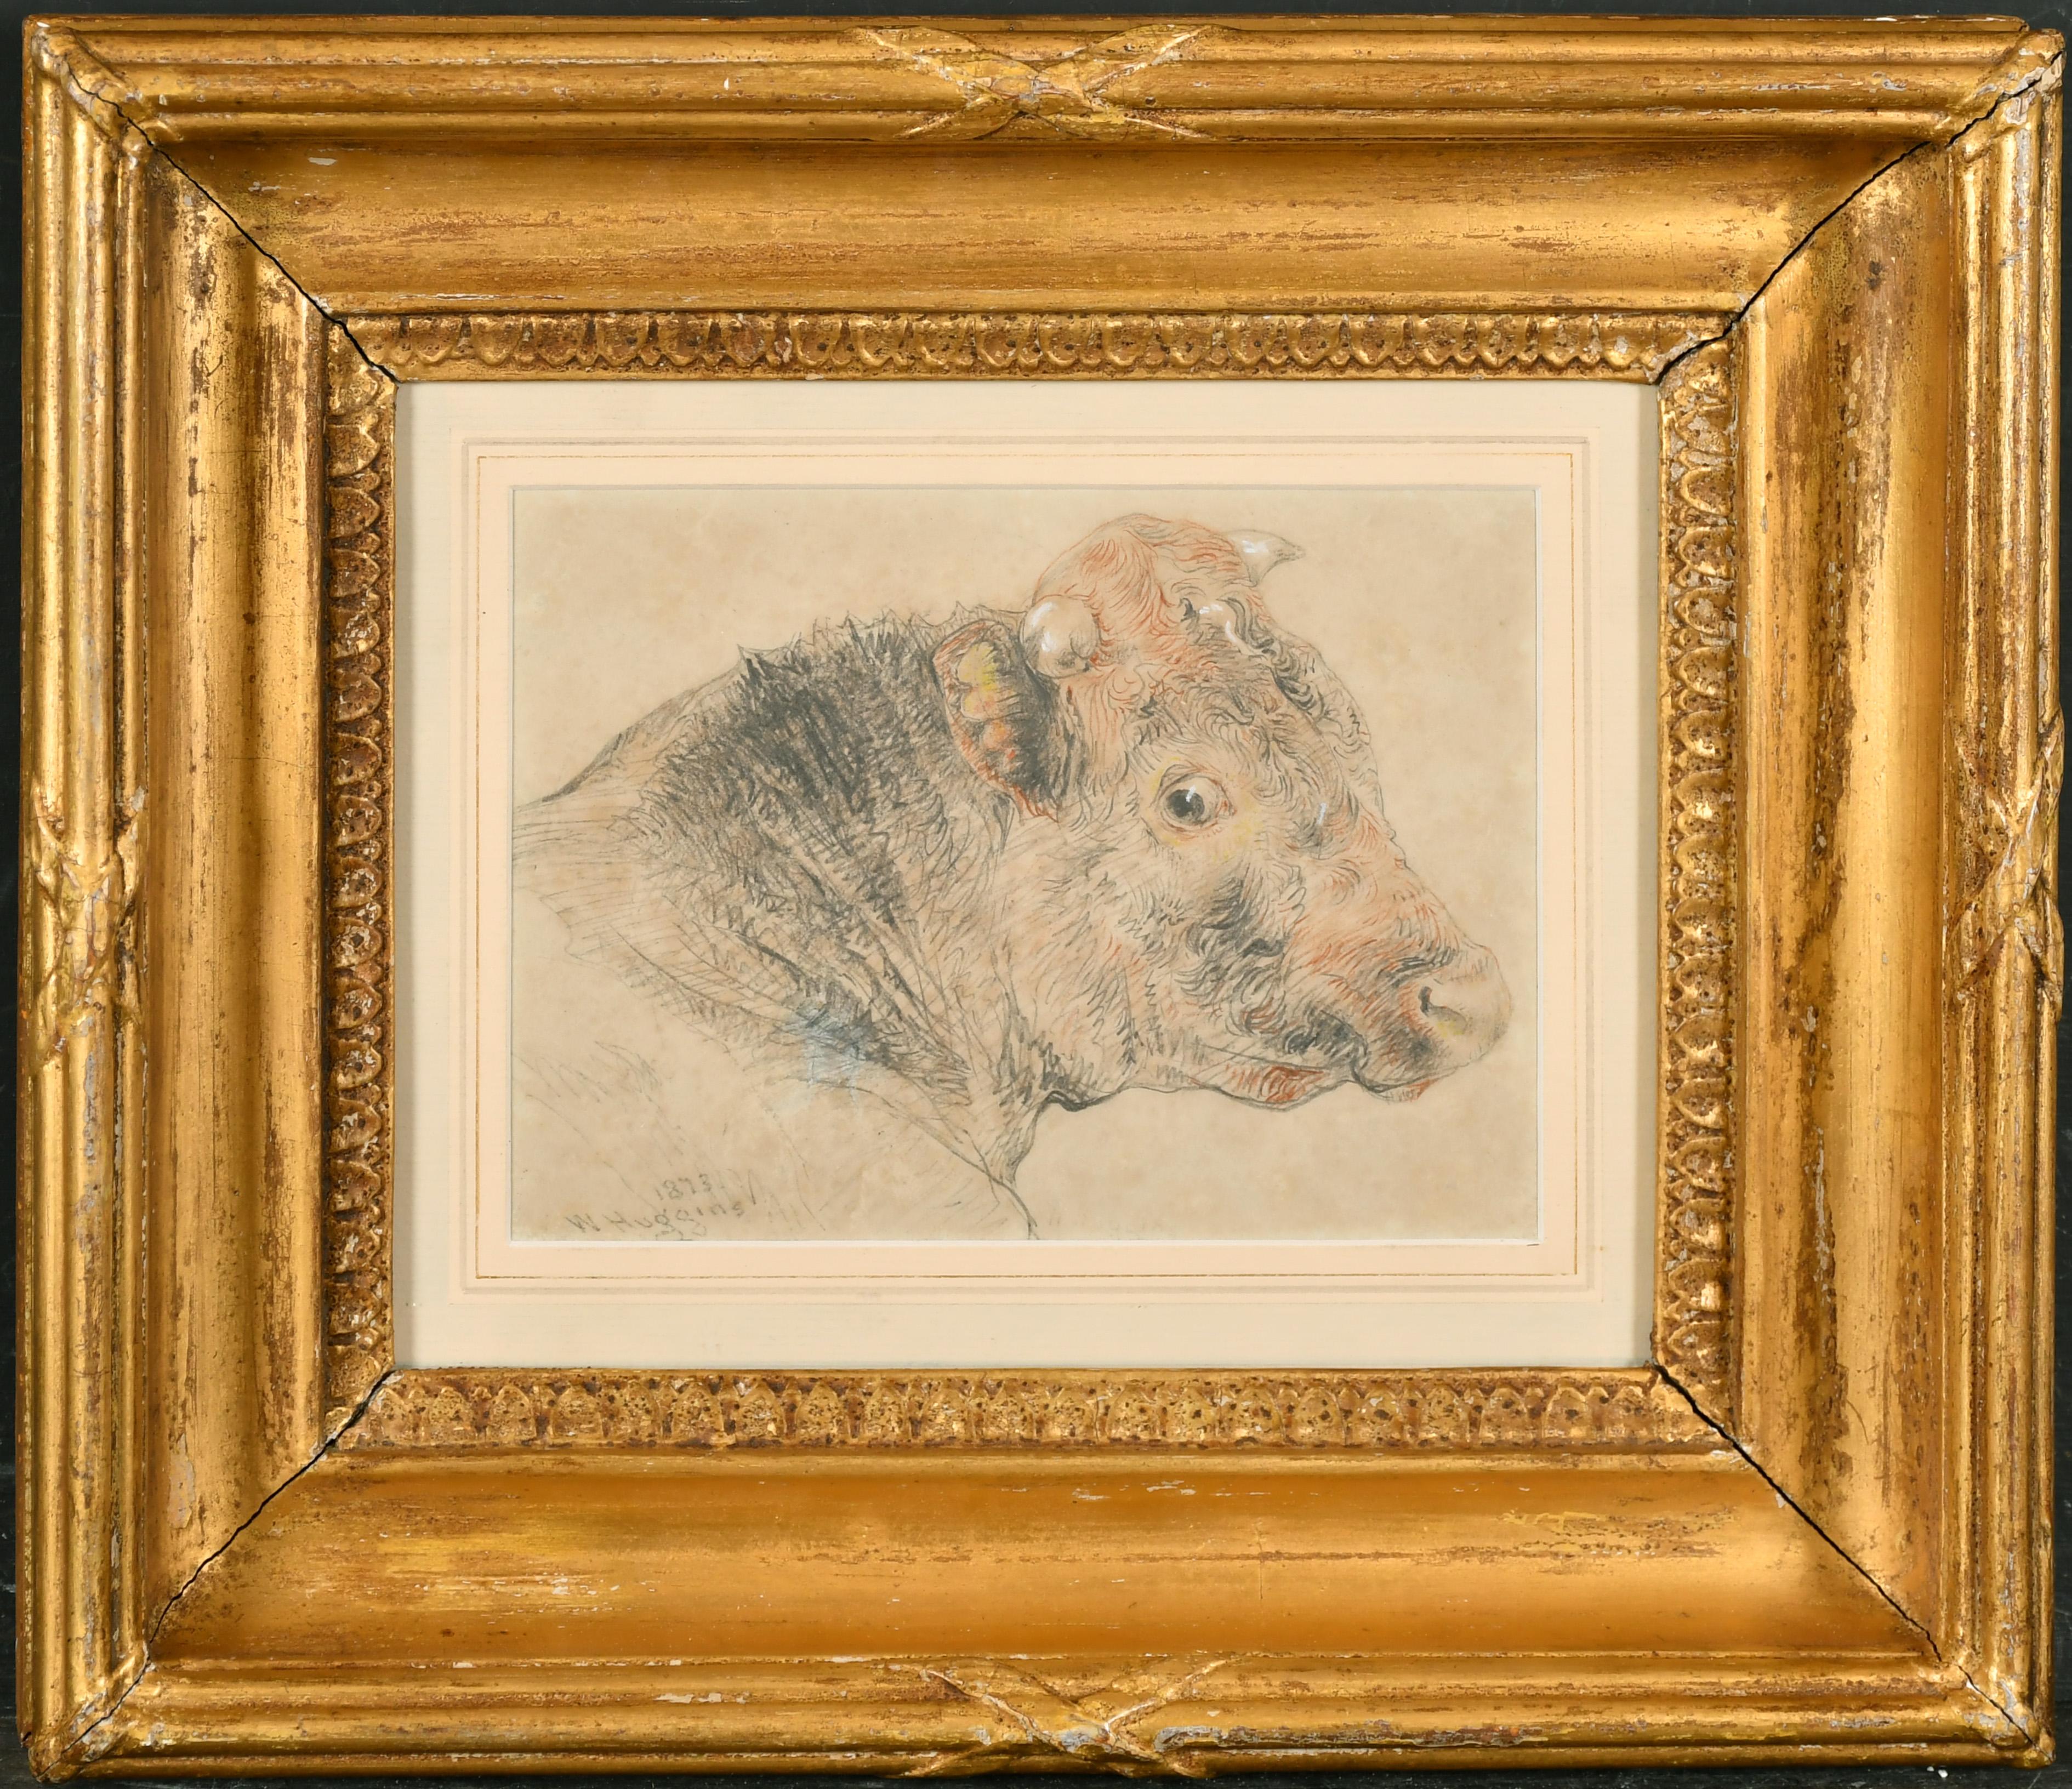 William Huggins Portrait - 19th century English chalk drawing on paper of Cow